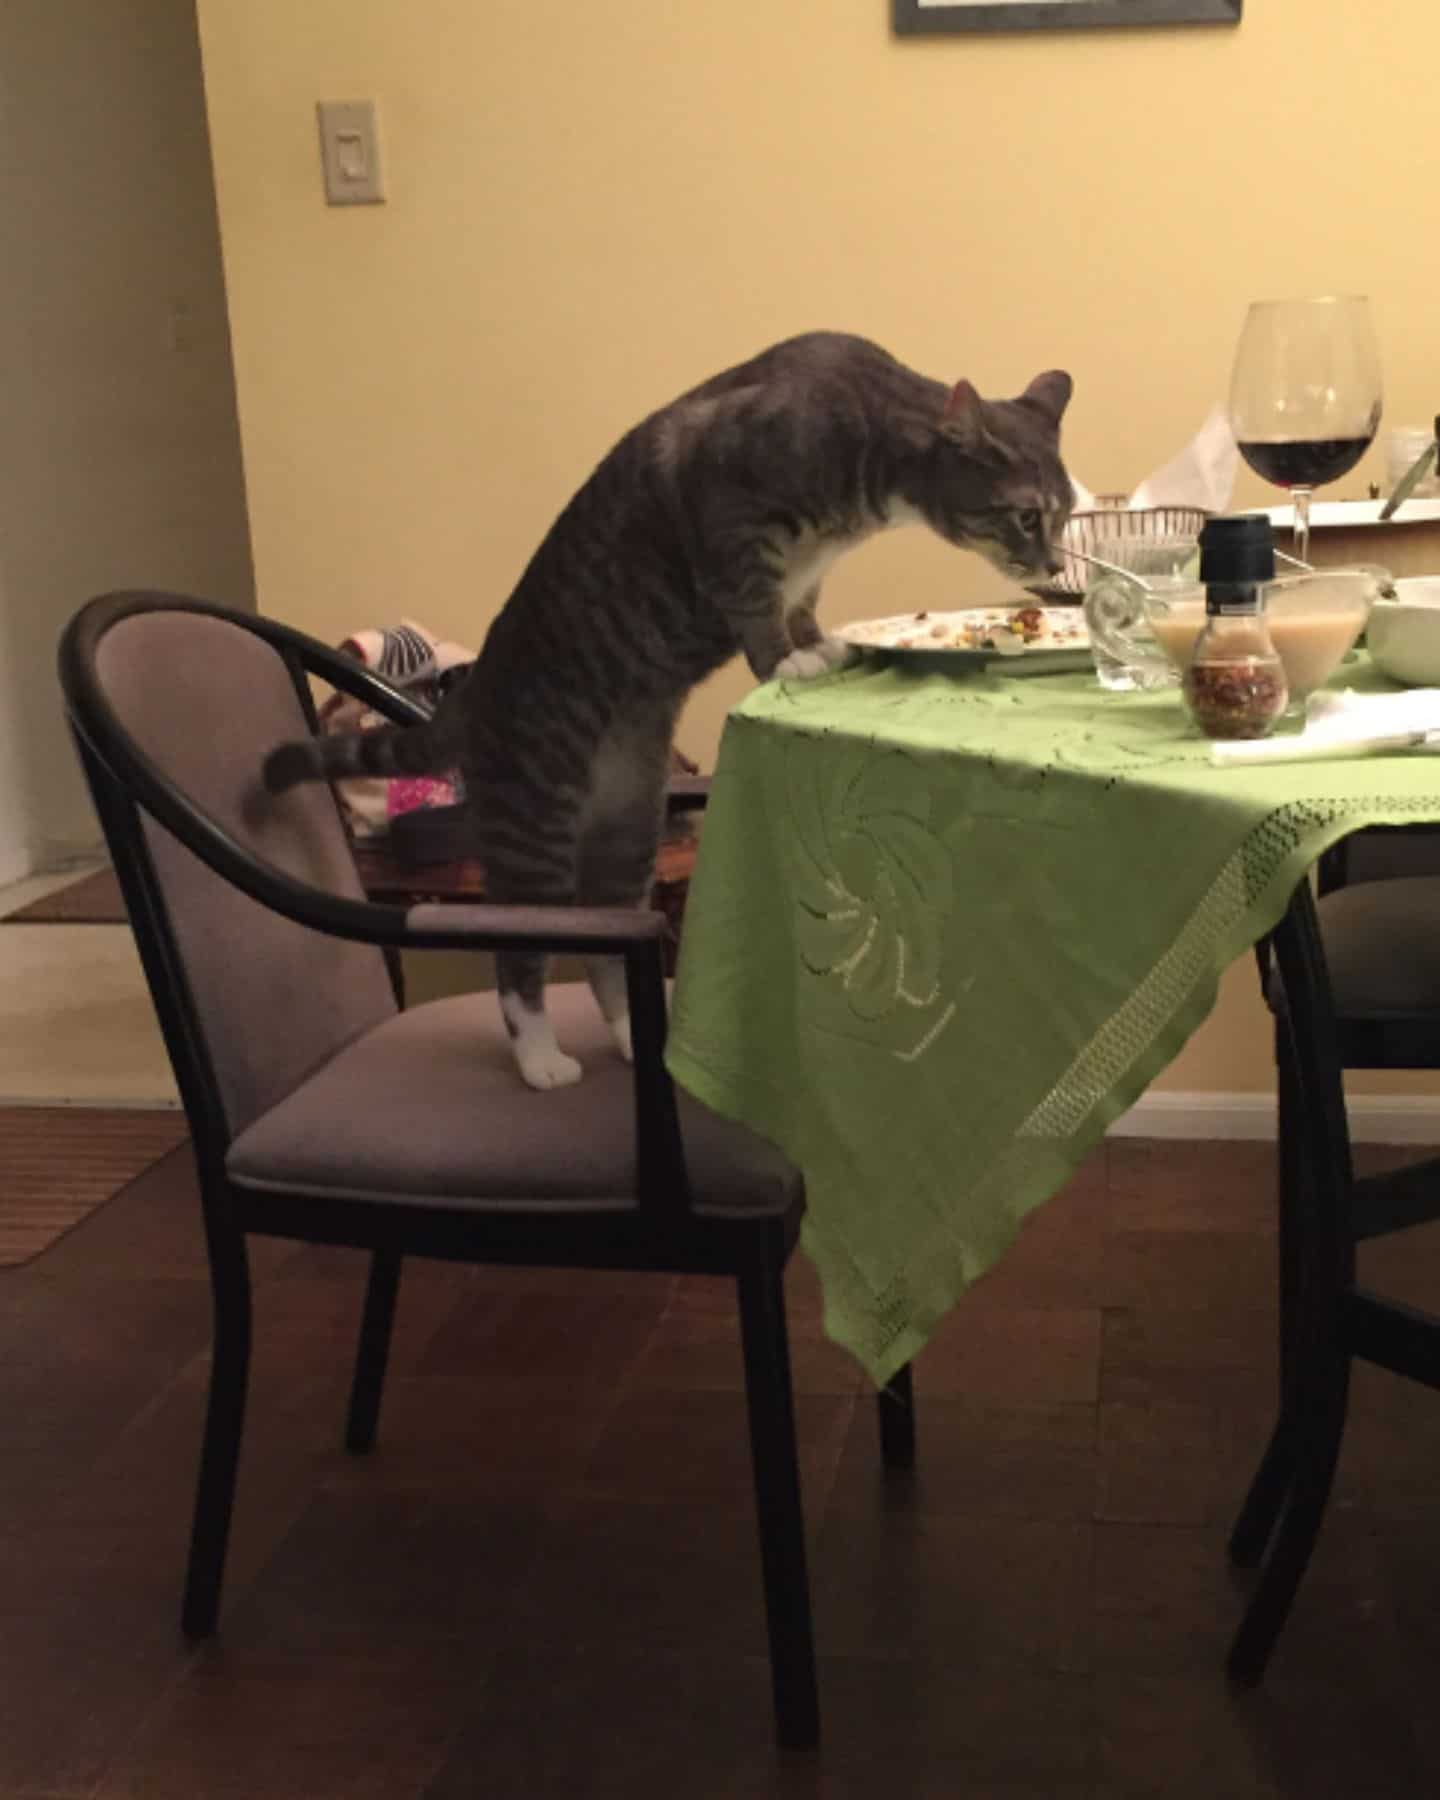 the cat from the chair eats food from the table